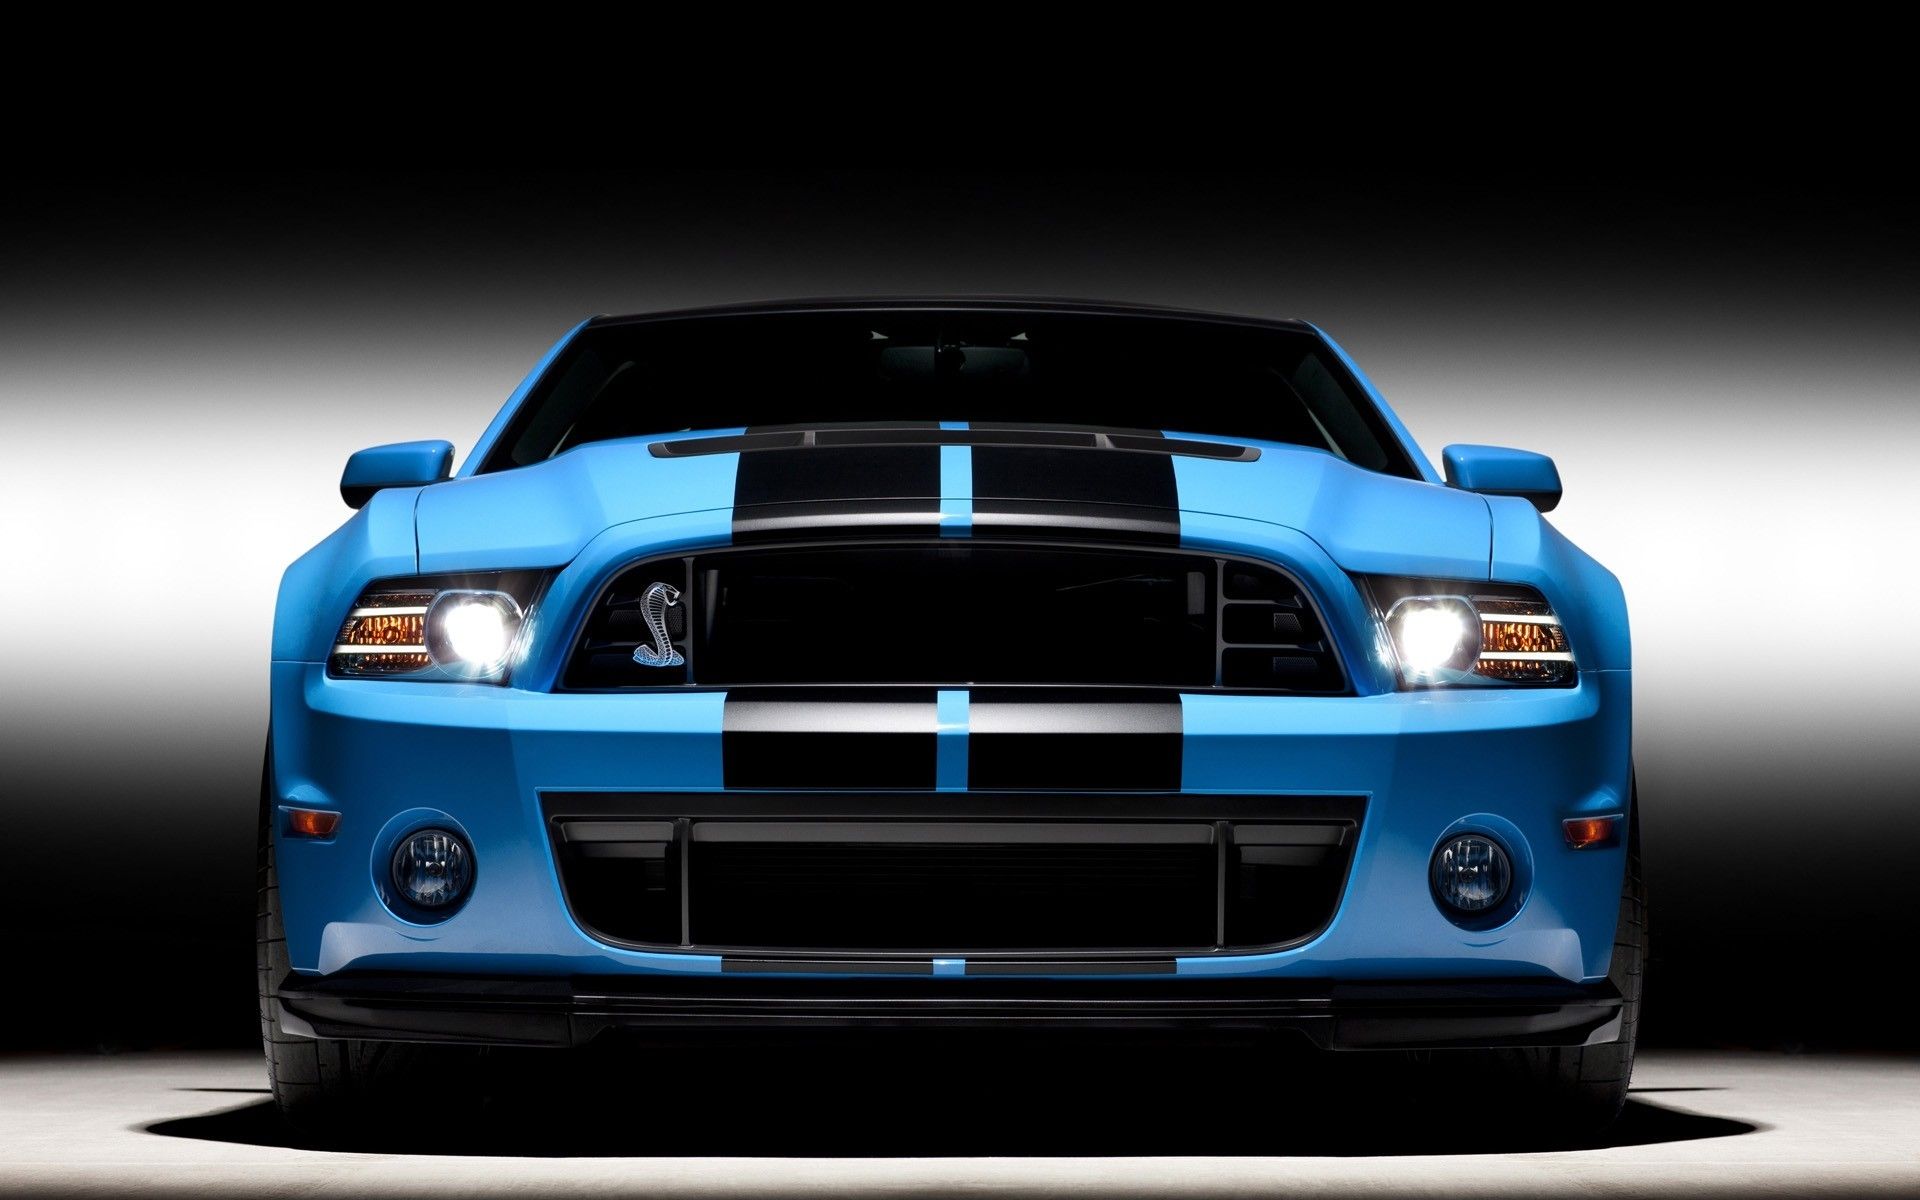 69 Ford Mustang Shelby GT500 HD Wallpapers | Backgrounds ...